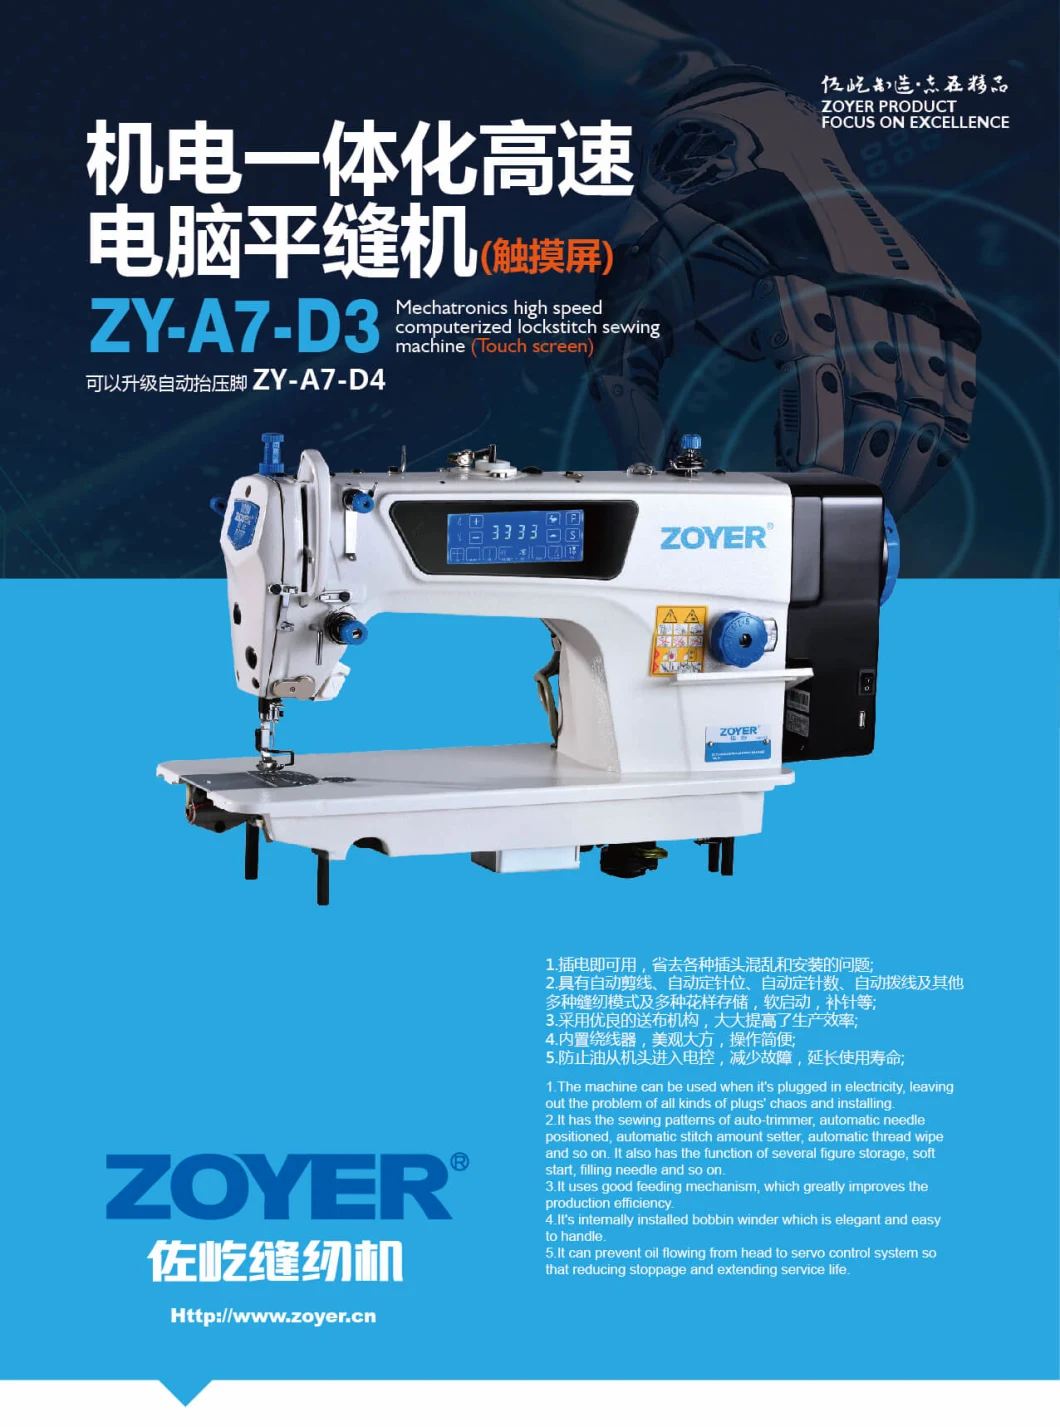 Hot Selling Zy-A5-D3 Zoyer Speaking Direct Drive Auto Trimmer High Speed Flat Sewing Machine